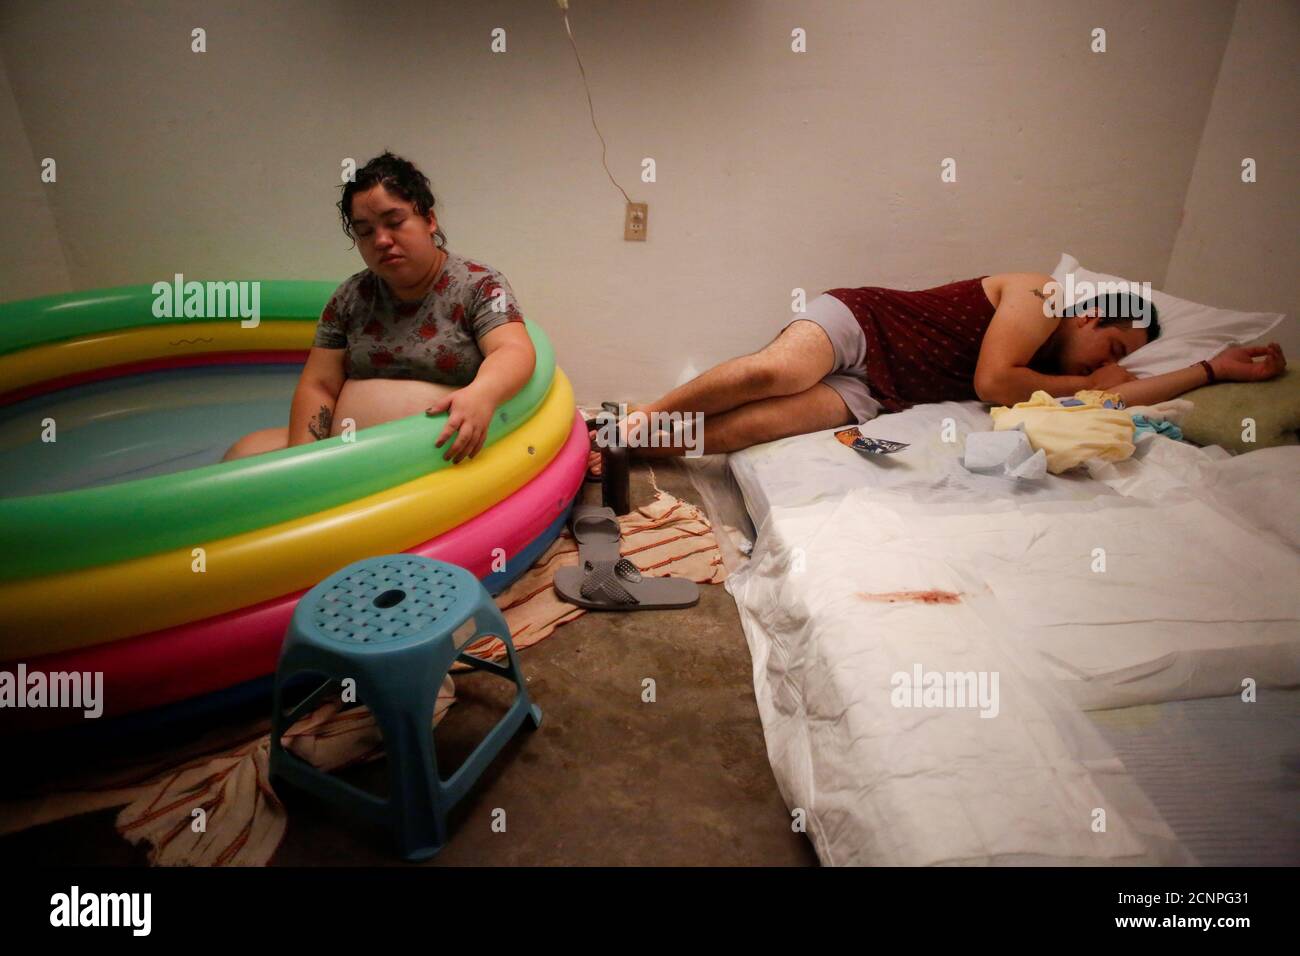 Miguel Flores Torres, 24, rests on a bed next to his wife Karla Lopez Rangel, 24, who is pregnant, as she sits in a inflatable birthing pool while labouring at their home, where she plans to give birth, during the coronavirus disease (COVID-19) outbreak, in Xochimilco, Mexico City, Mexico, May 25, 2020. REUTERS/Gustavo Graf     SEARCH 'COVID-19 MEXICO BIRTH' FOR THIS STORY. SEARCH 'WIDER IMAGE' FOR ALL STORIES. Stock Photo